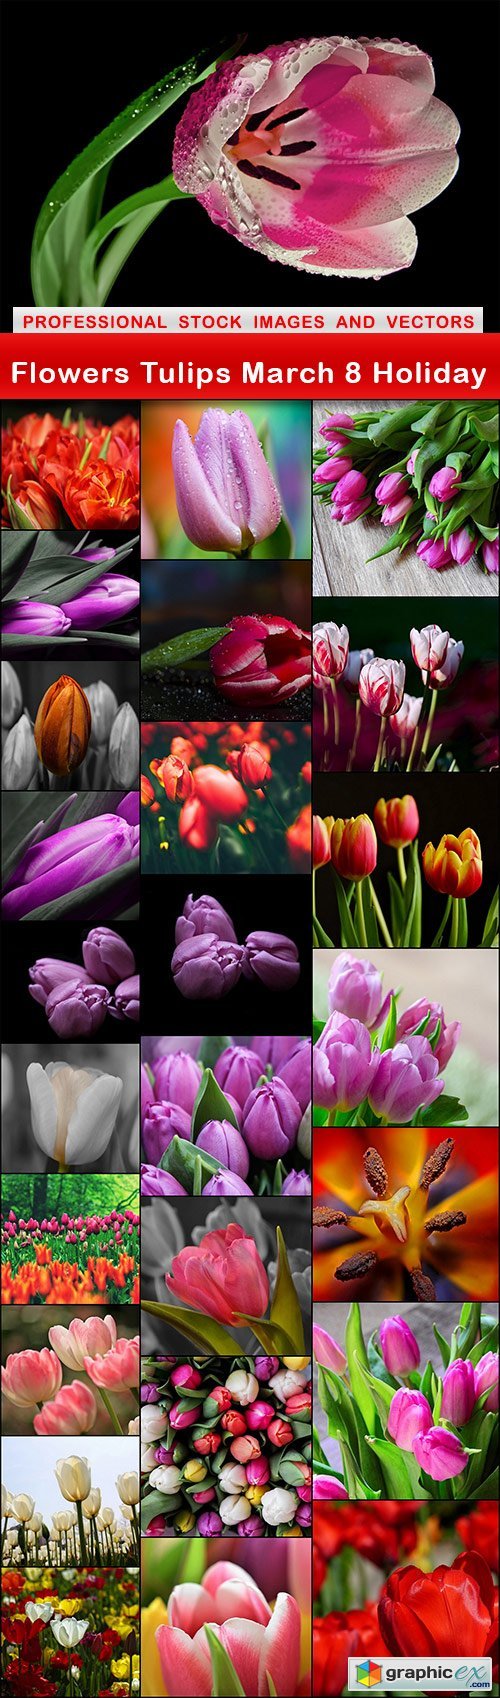 Flowers Tulips March 8 Holiday - 26 UHQ JPEG